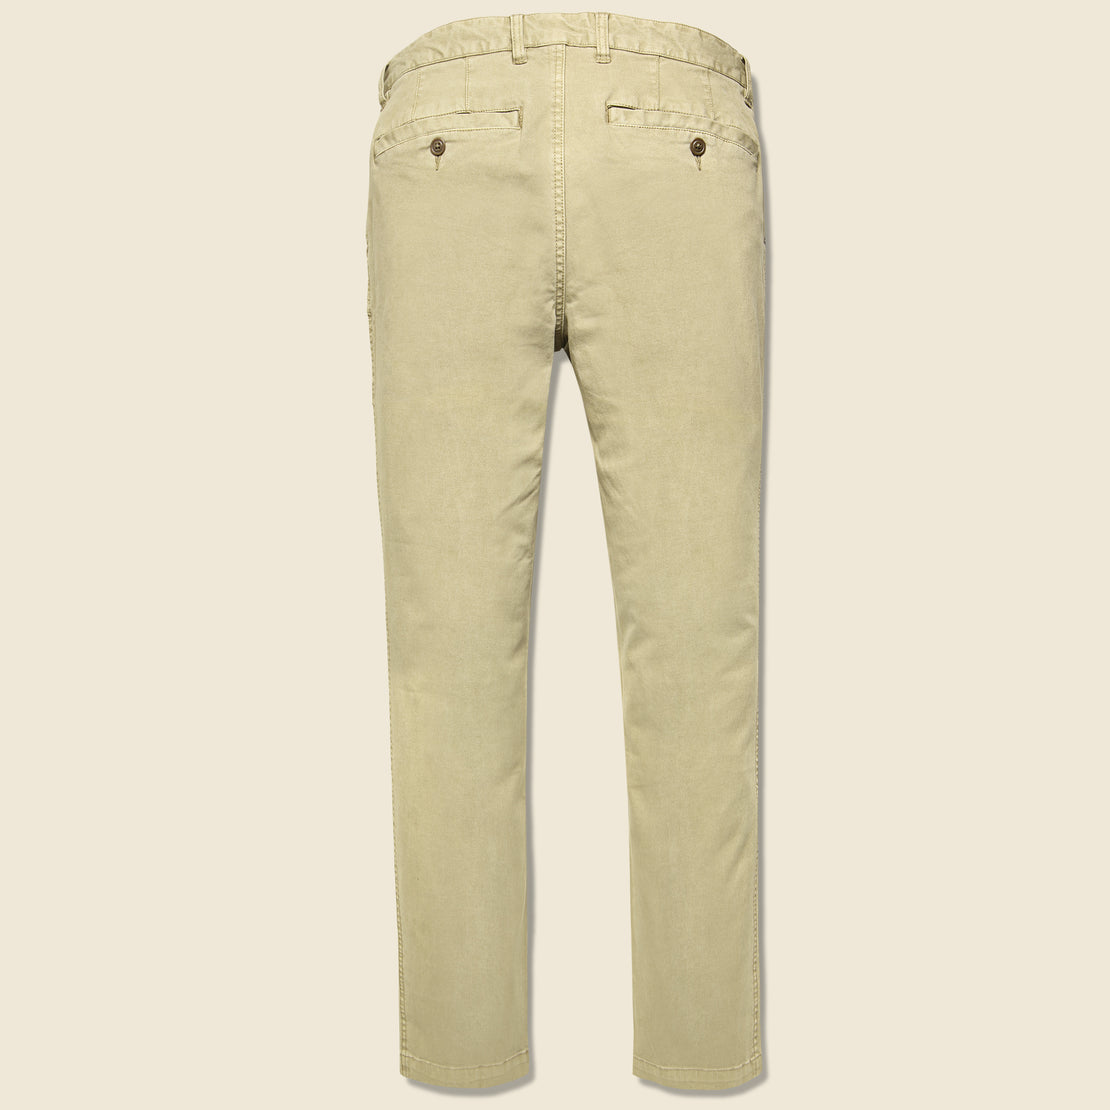 Stretch Canvas Trouser - British Khaki - Faherty - STAG Provisions - Pants - Twill